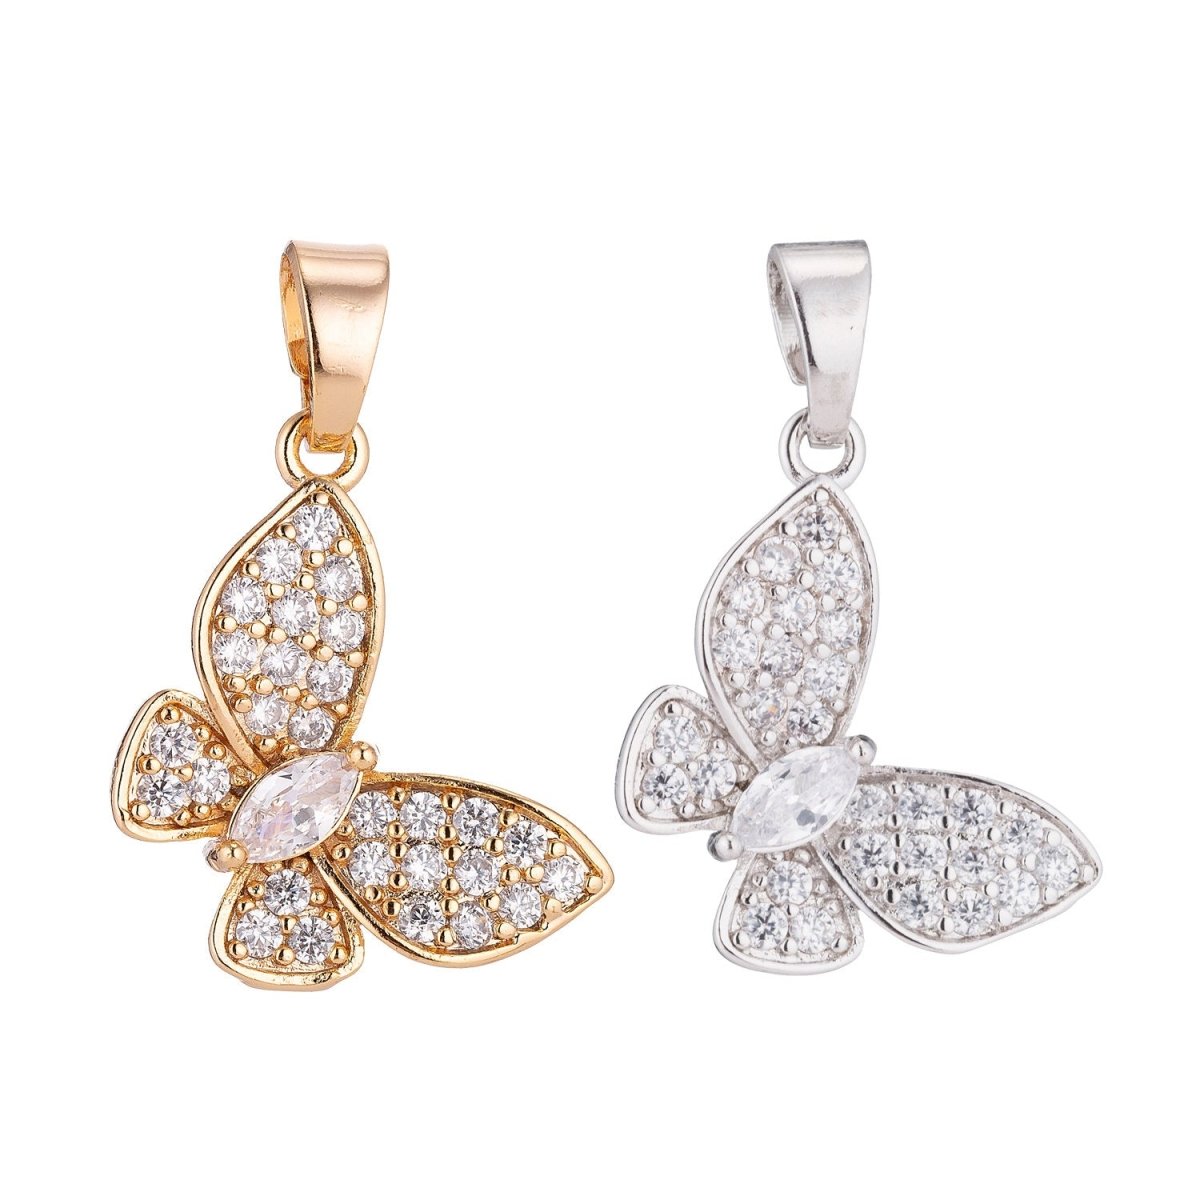 24K Gold Filled Clear Marquise Micro Paved CZ Butterfly Animal Pendant | H019 - DLUXCA